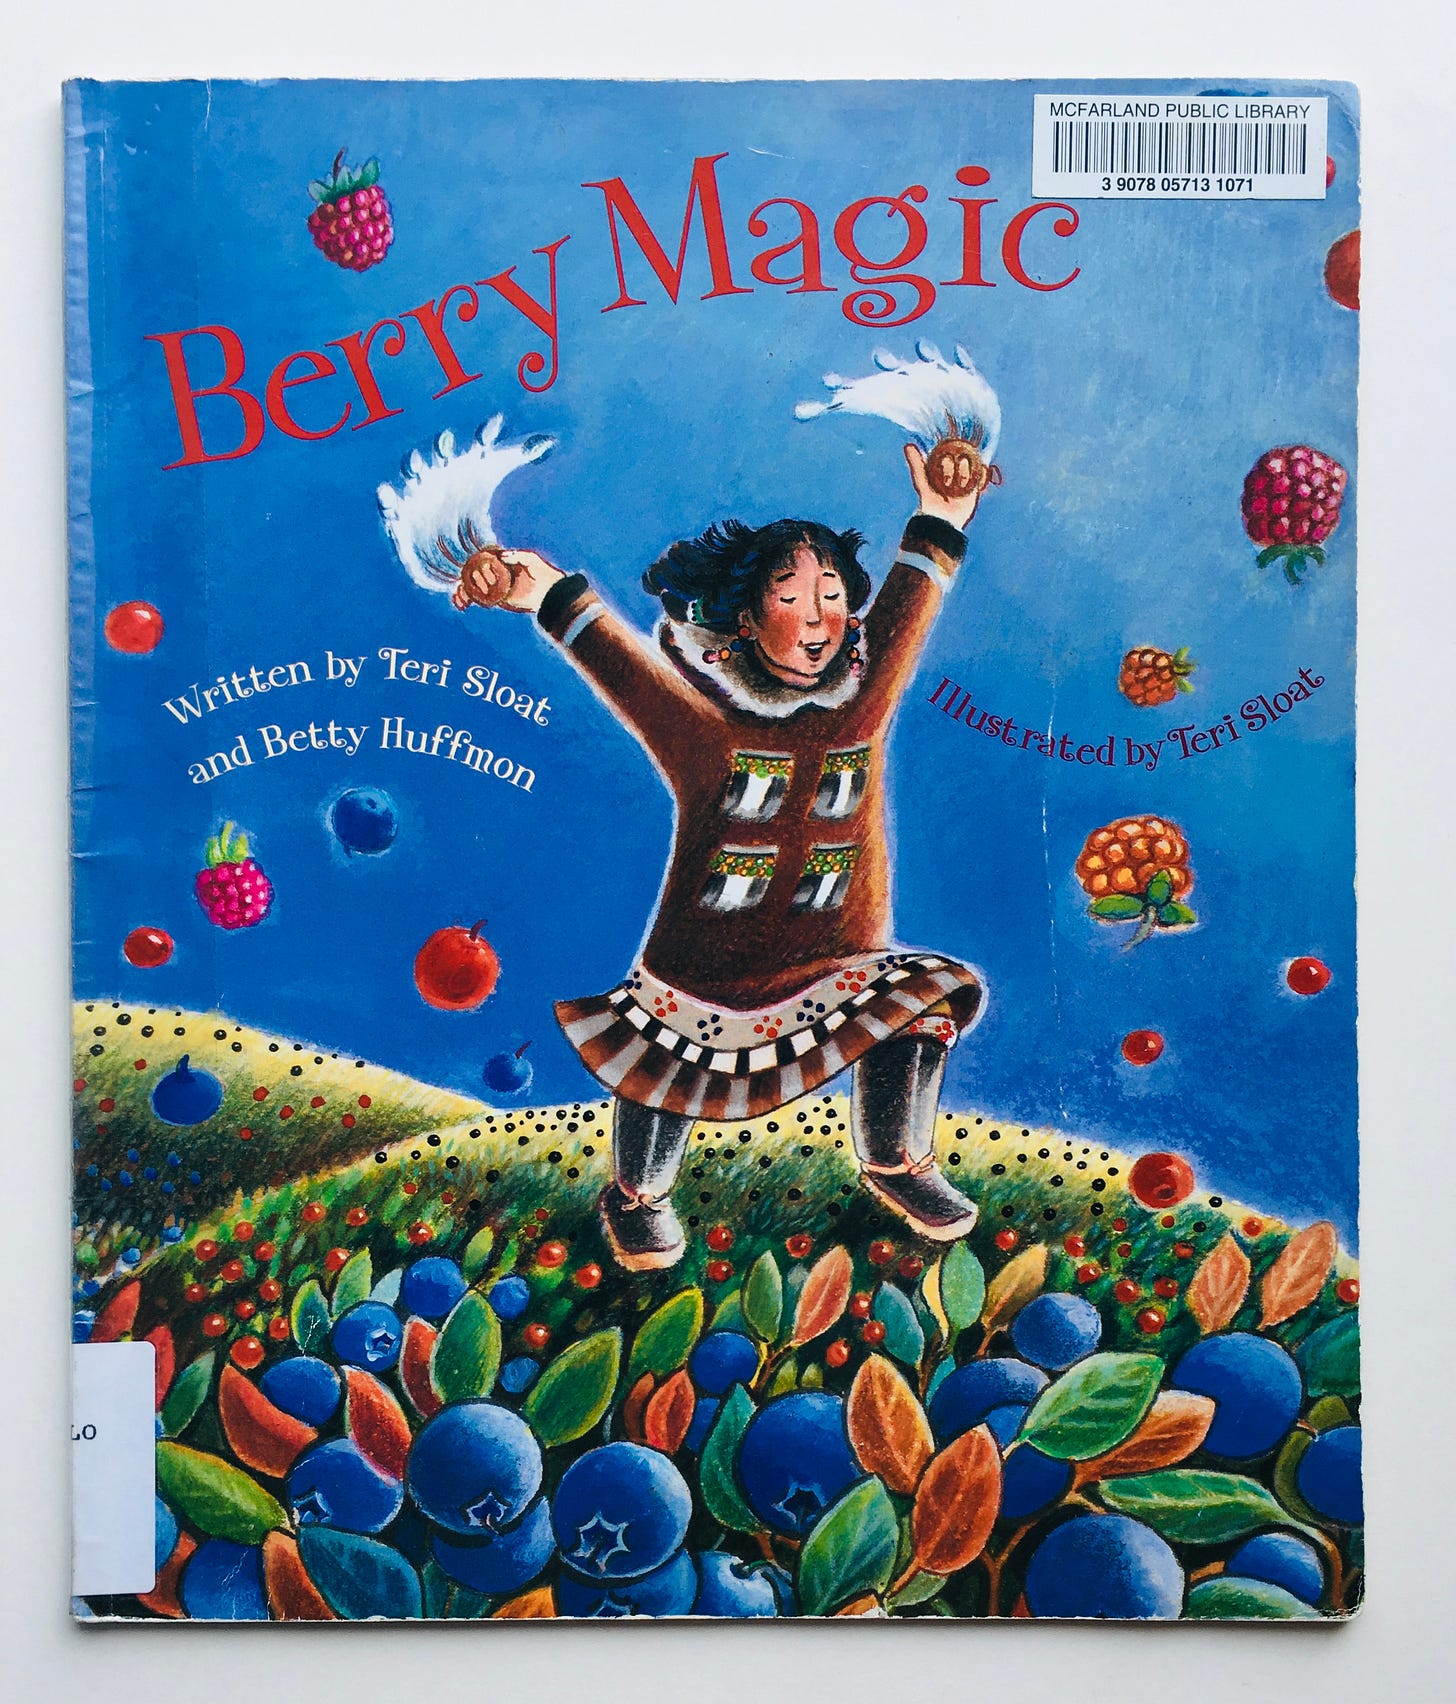 A girl dances across a meadow full of berries with her hands raised 